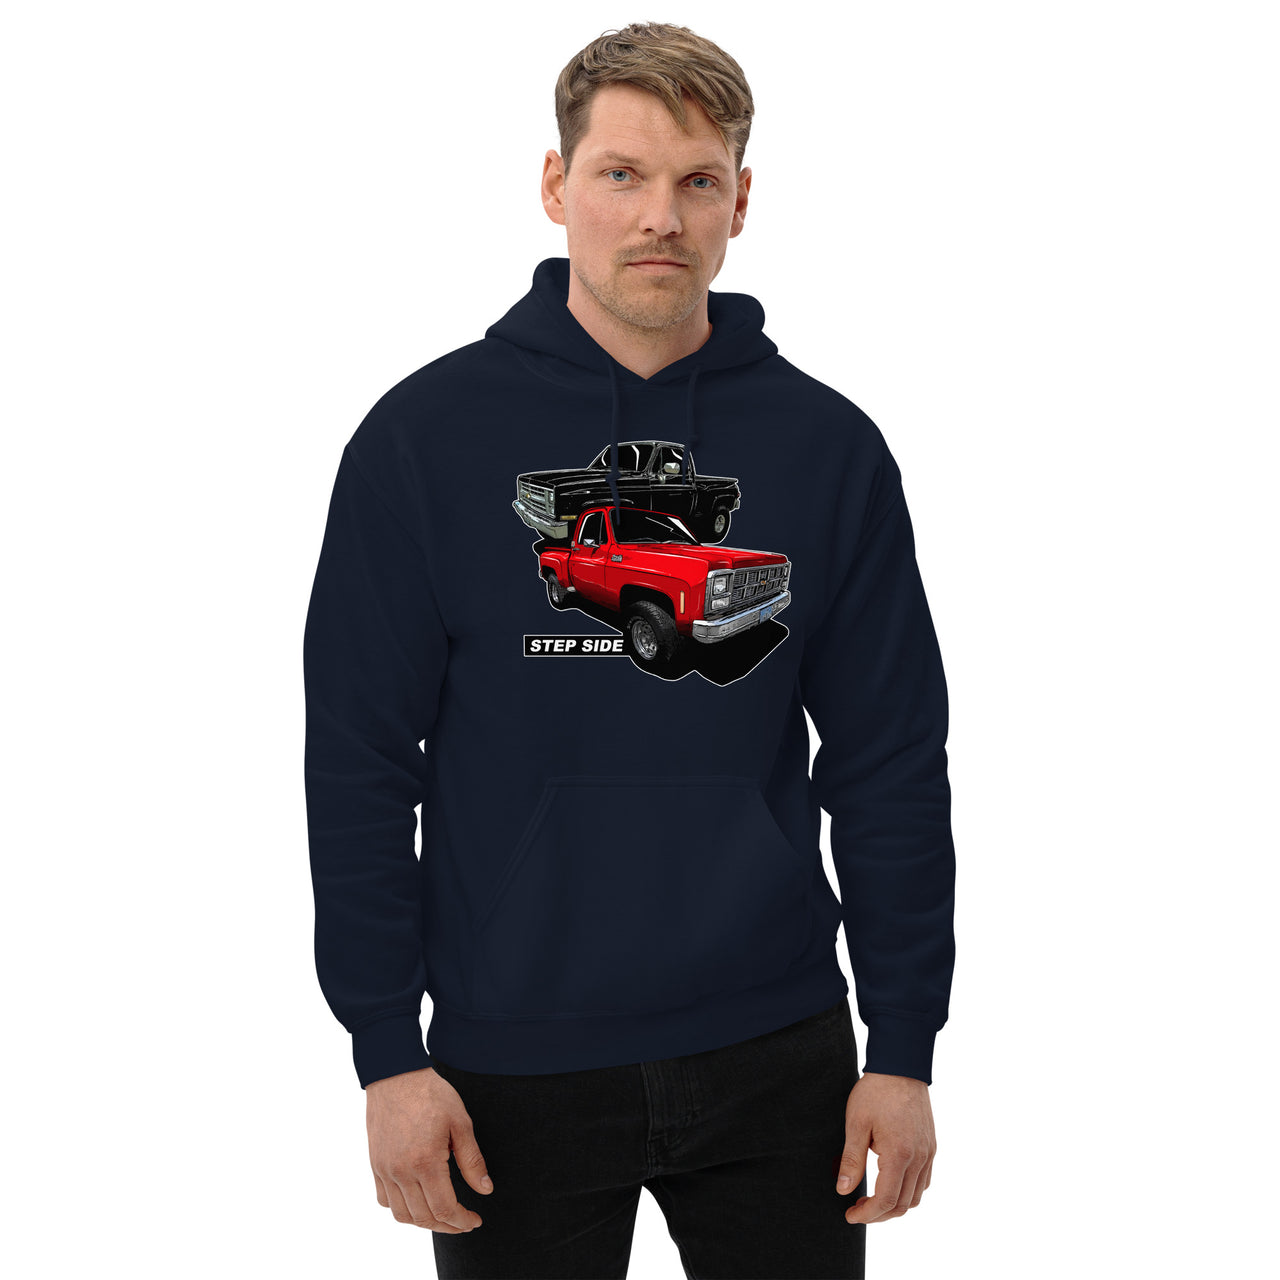 step side square body truck hoodie modeled modeled in navy